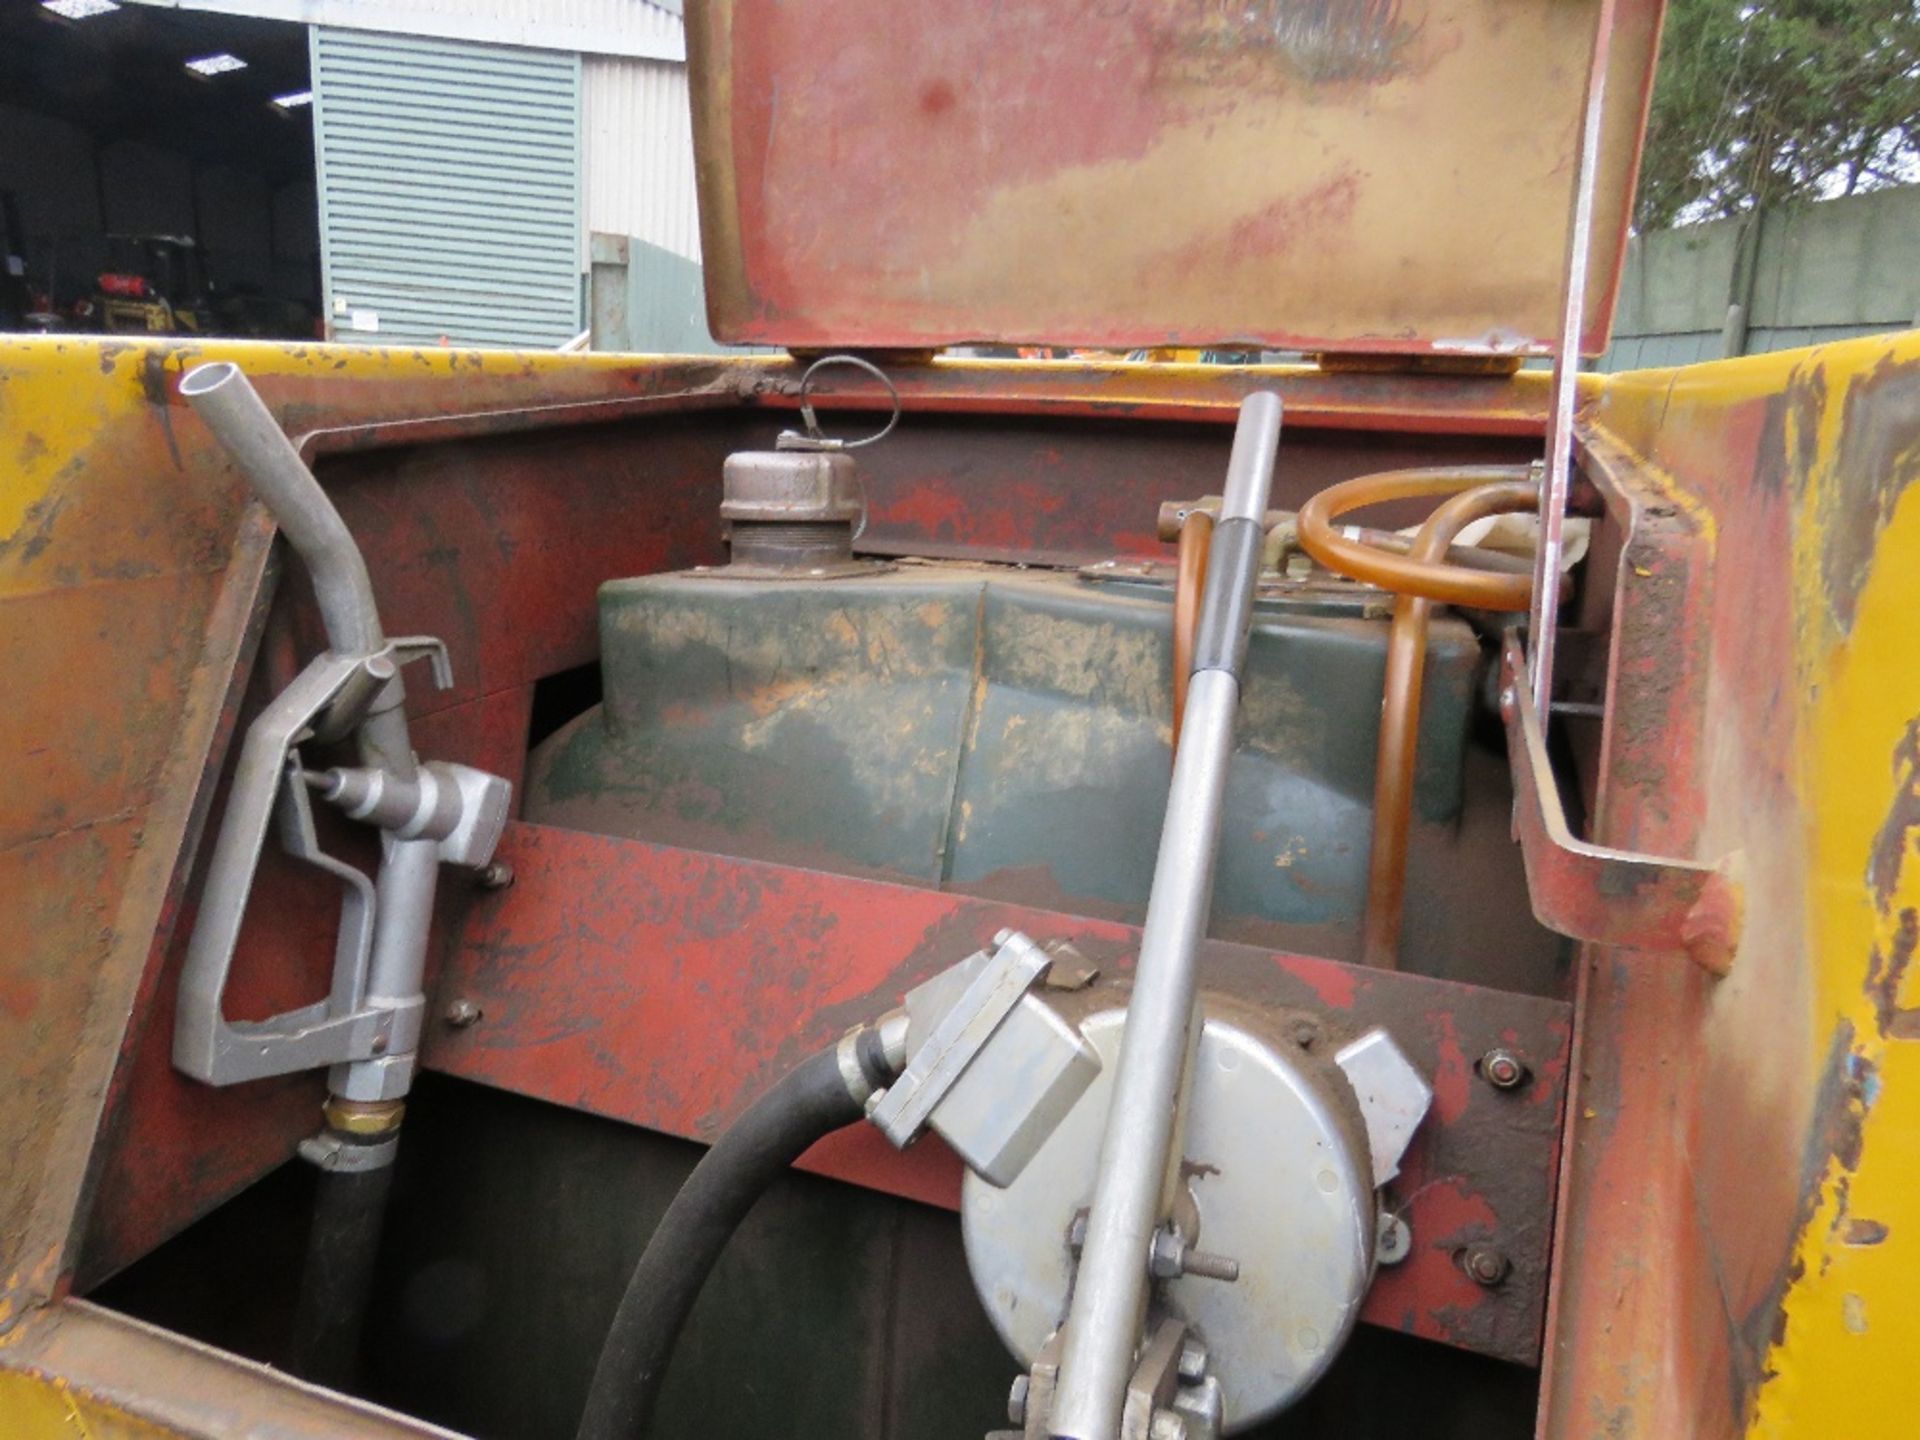 fuel safe 300 bunded fuel bowsers c/w hand operated pump and drip tray - Image 3 of 4